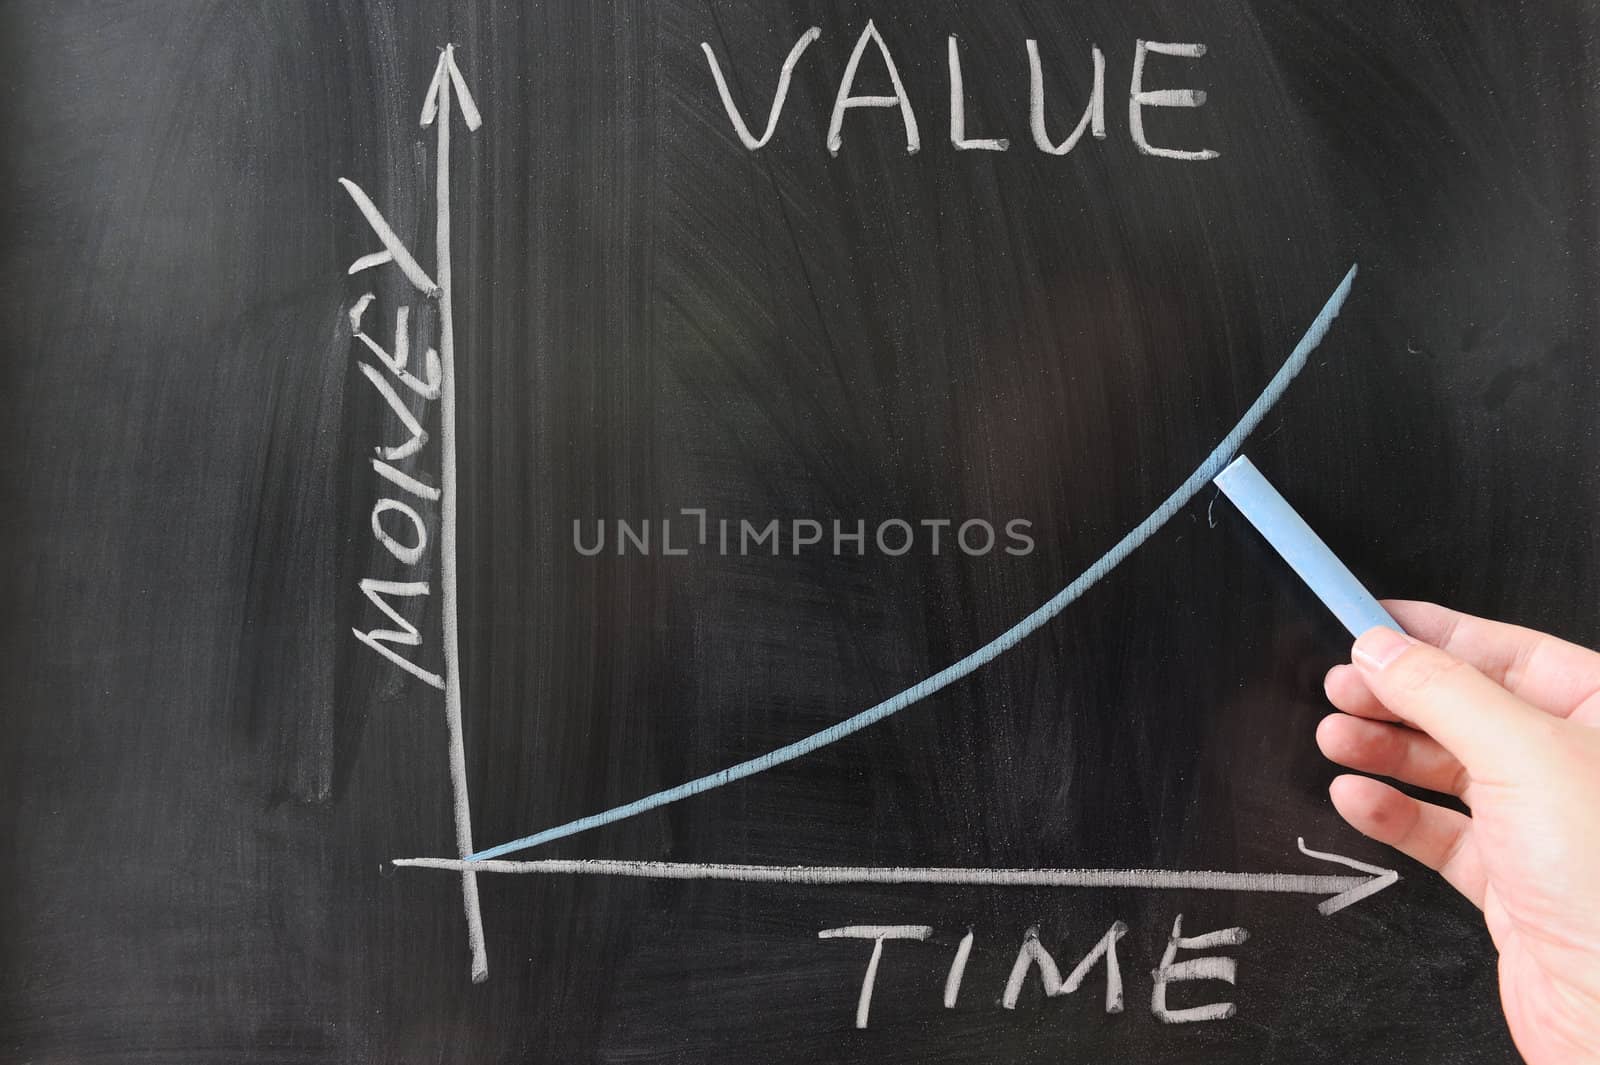 Time value of money graph drawn on the chalkboard with a hand holding a chalk